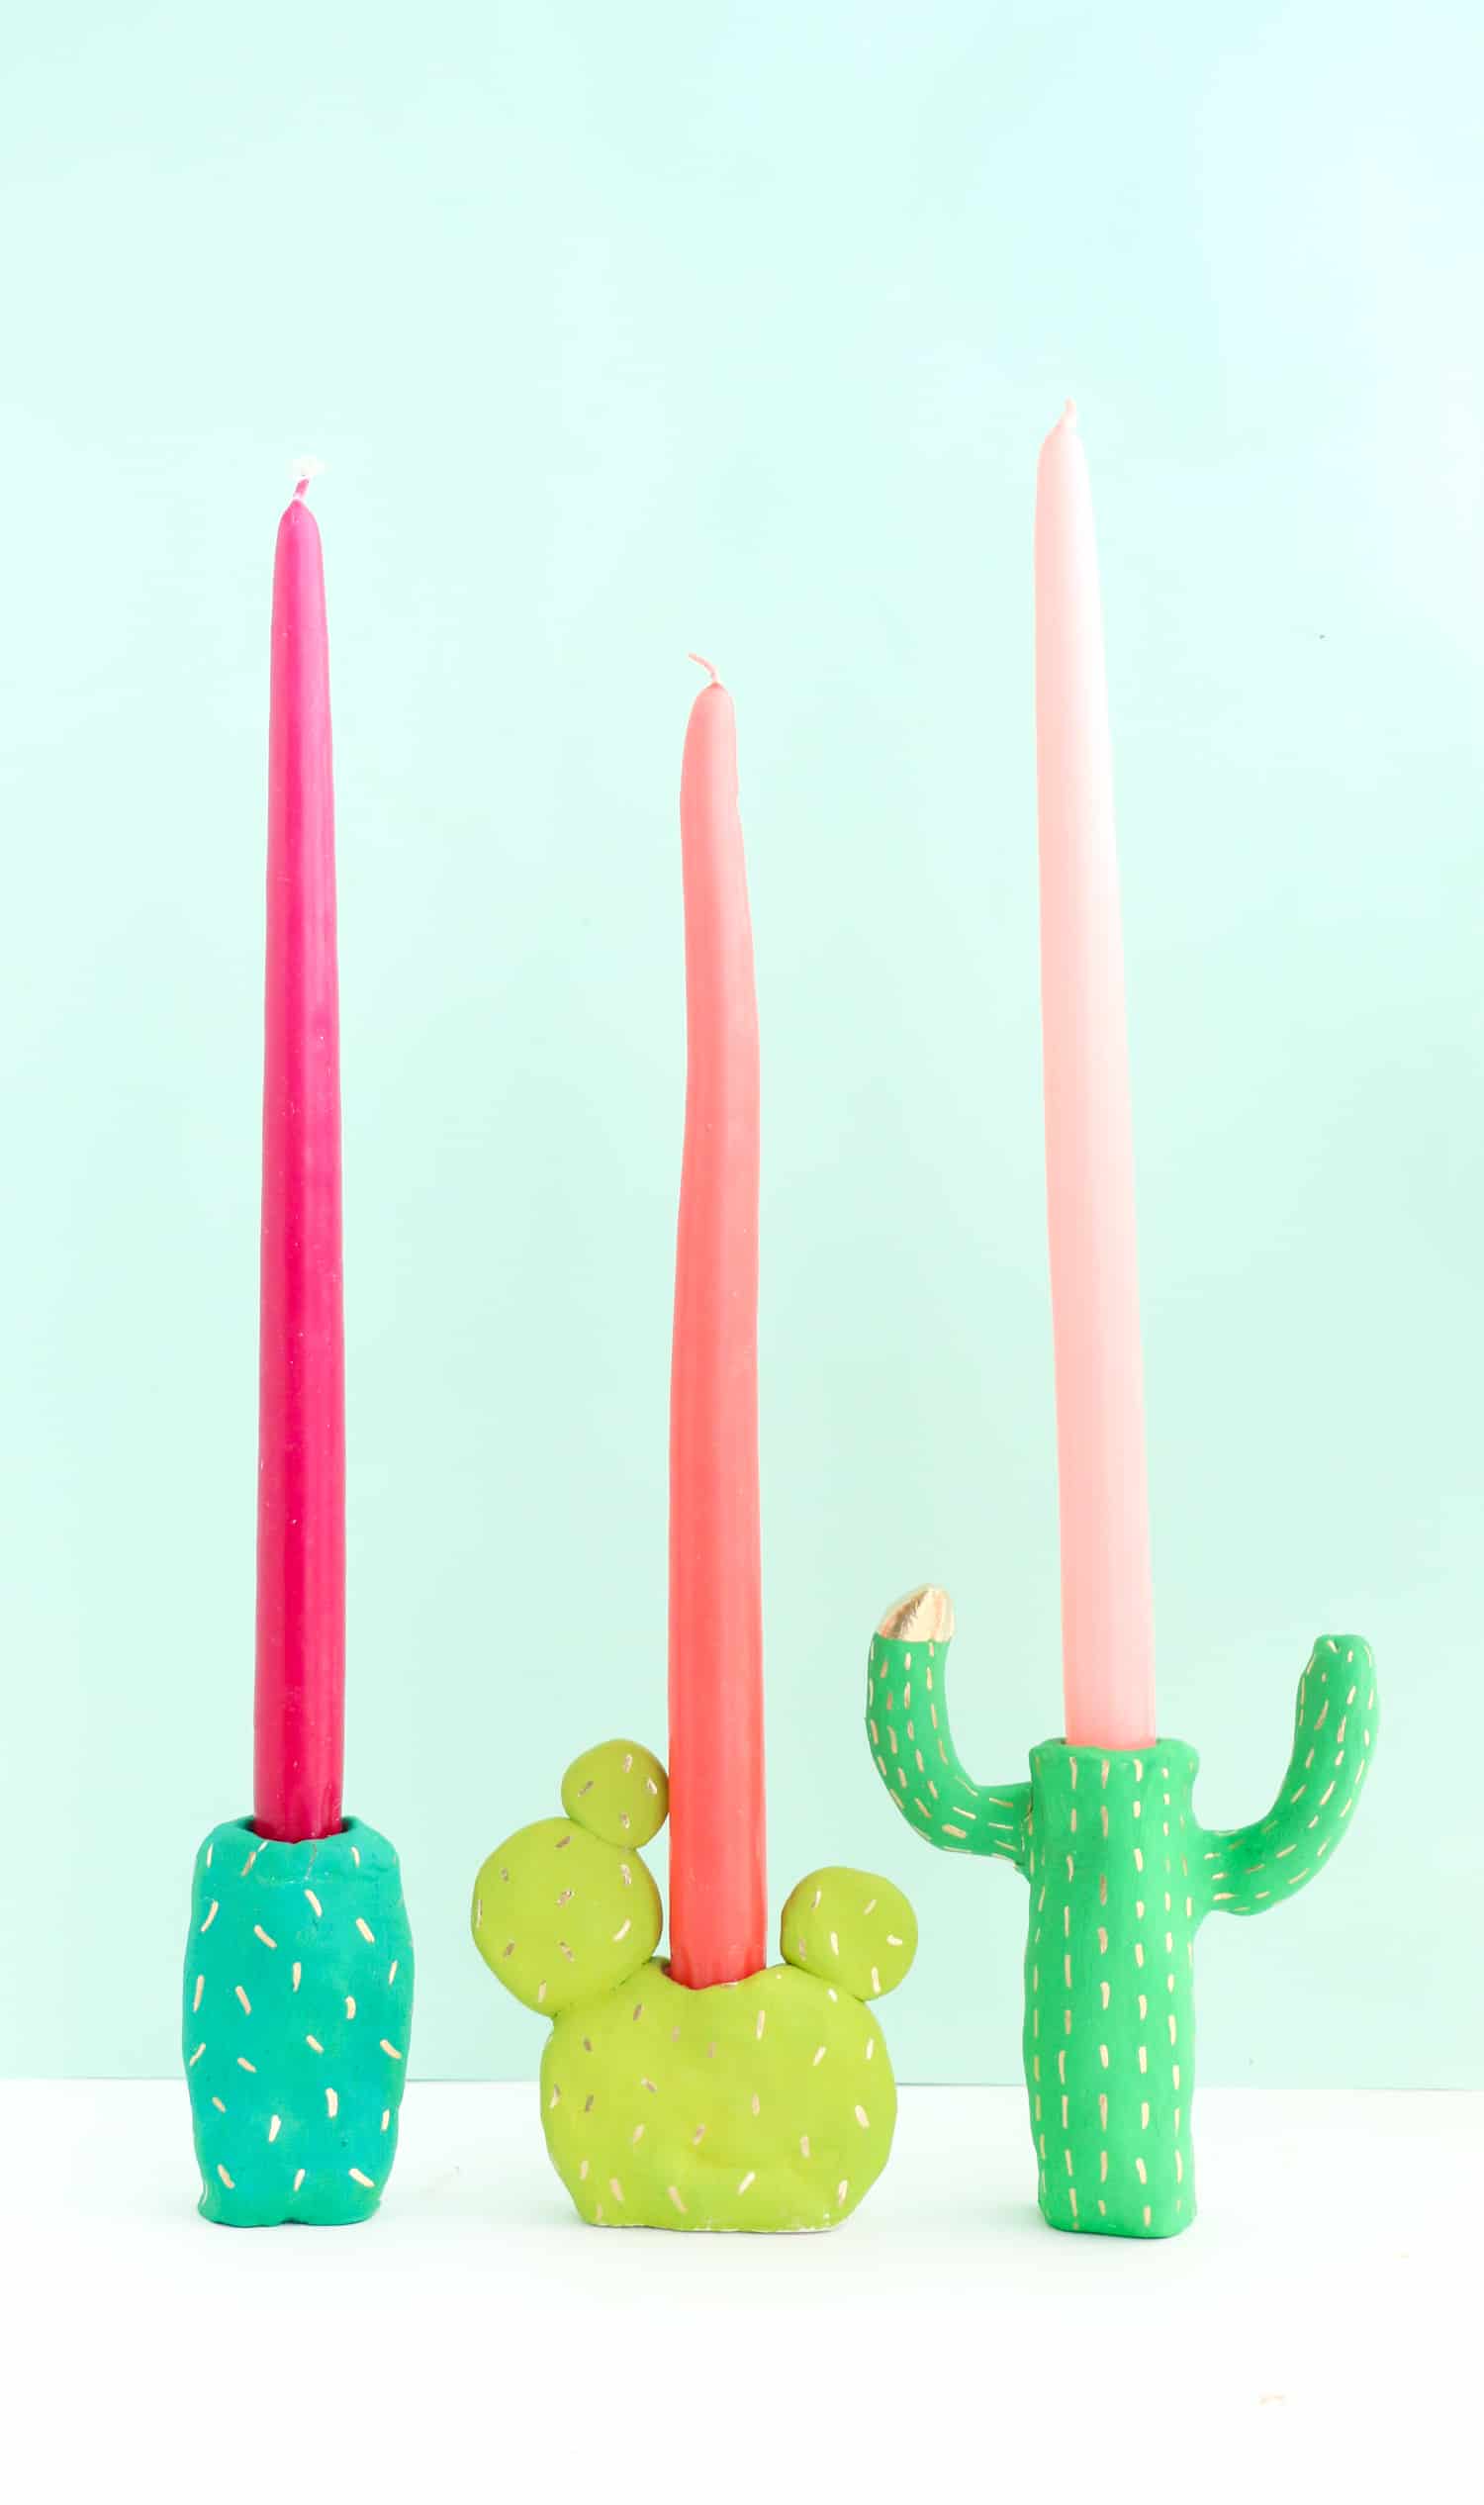 Fun-To-Make Cactus-Shaped Candle Holders Using Clay